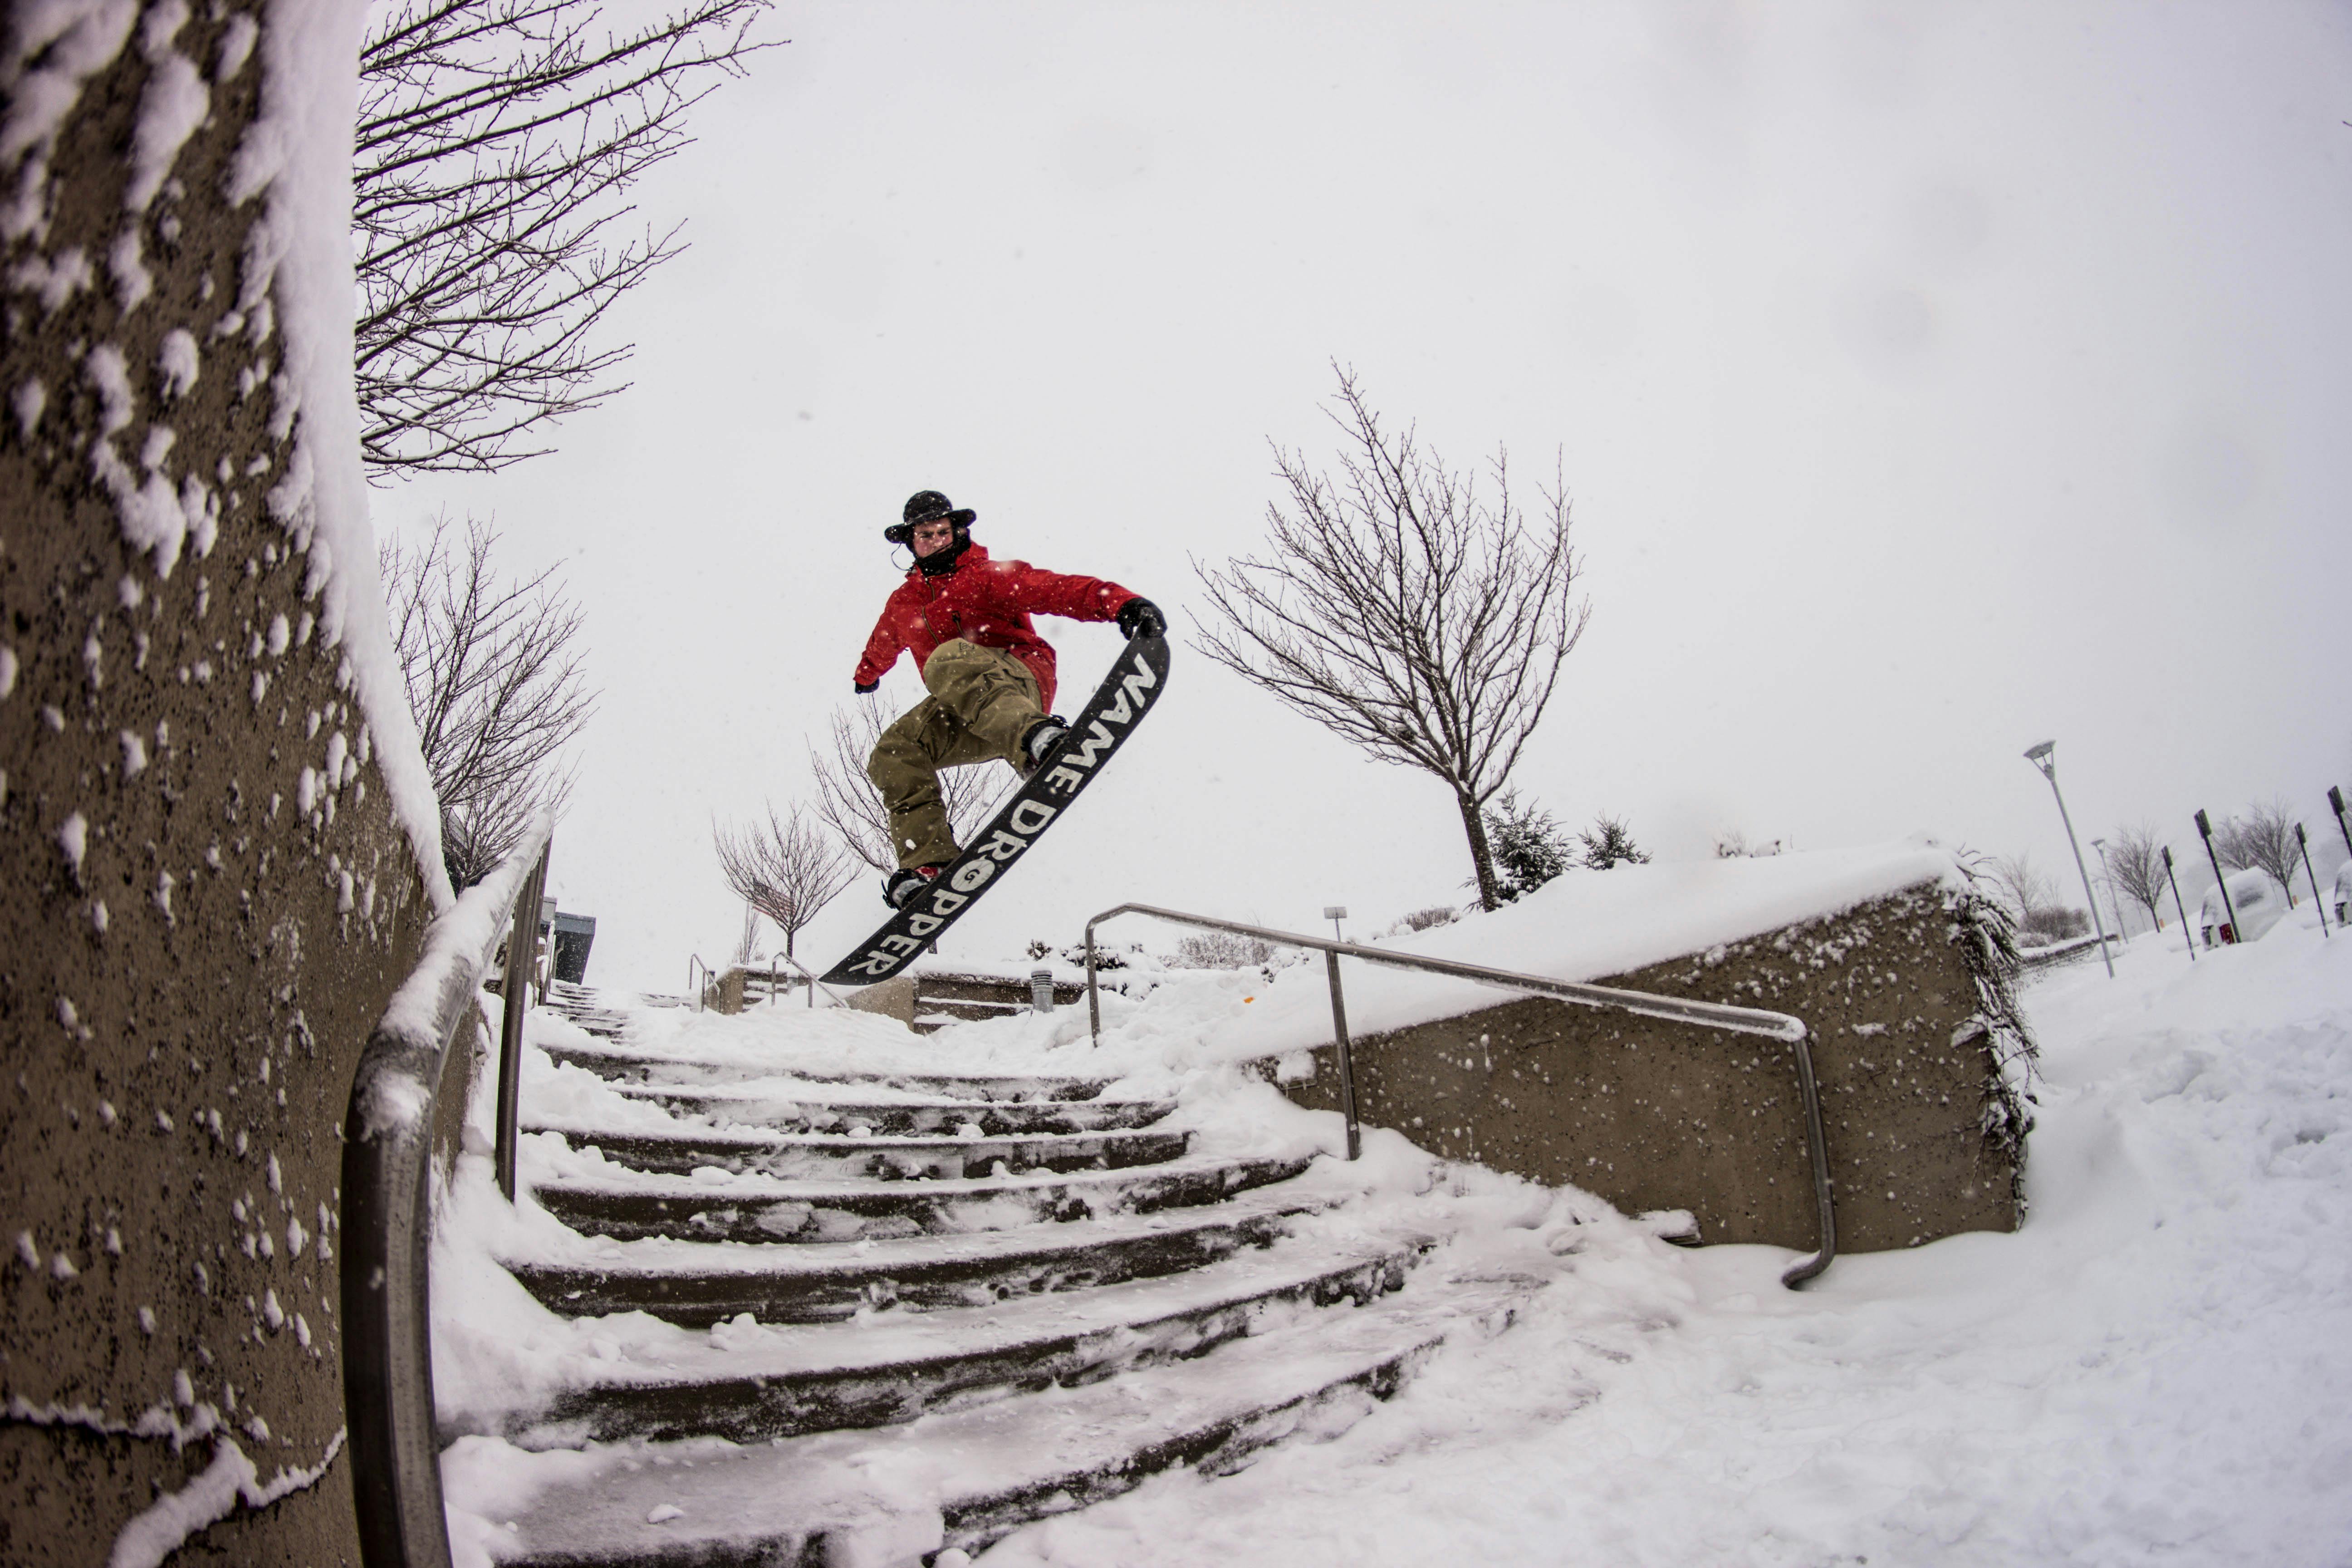 A snowboarder in a red jacket executes a jump down snowy stairs